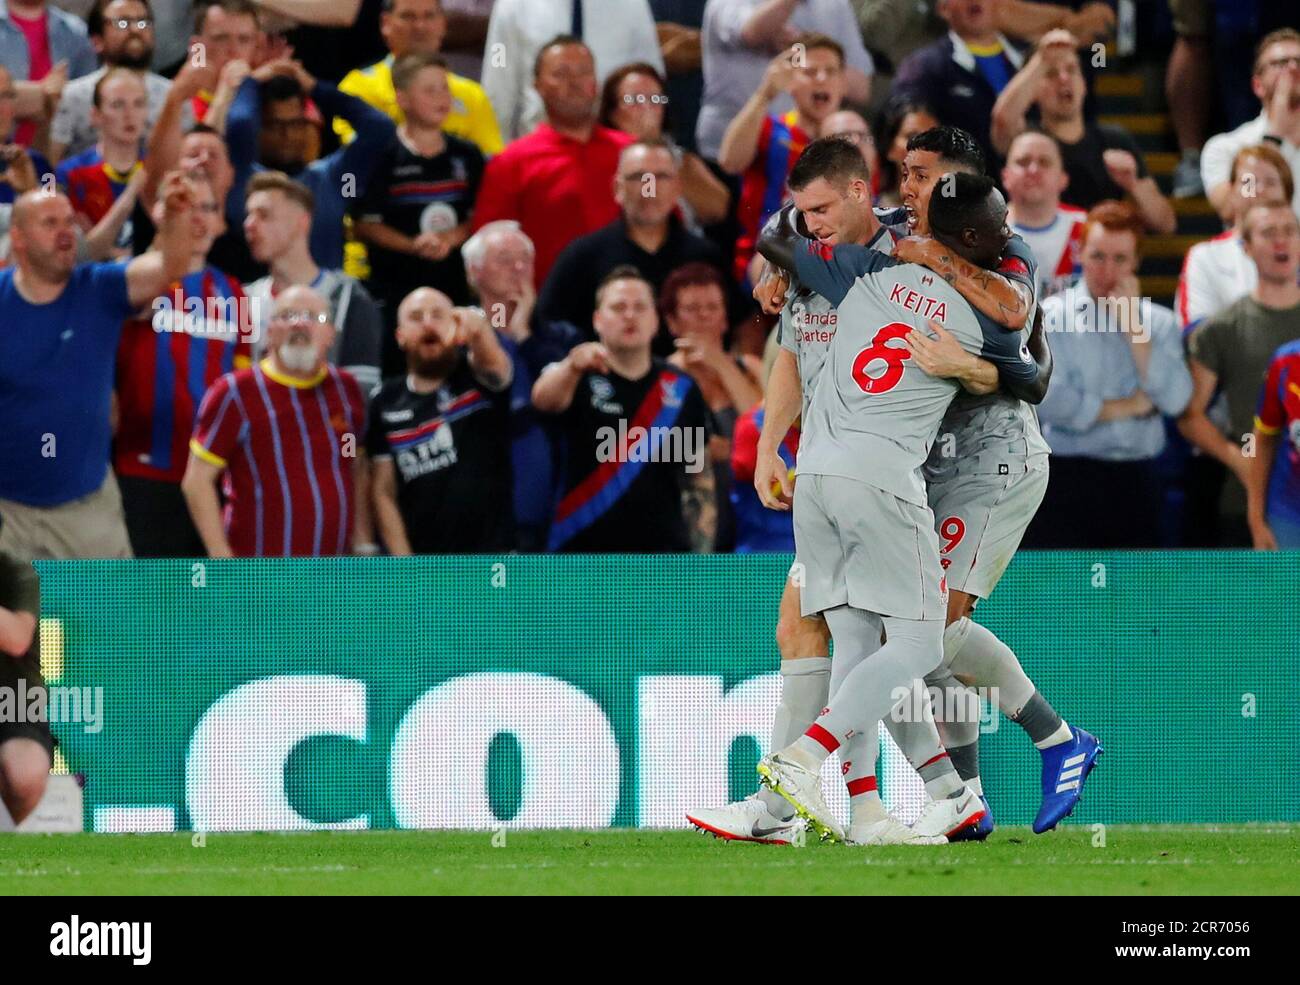 Soccer Football - Premier League - Crystal Palace v Liverpool - Selhurst Park, London, Britain - August 20, 2018  Liverpool's James Milner celebrates scoring their first goal from the penalty spot with Naby Keita and Roberto Firmino                   REUTERS/Eddie Keogh  EDITORIAL USE ONLY. No use with unauthorized audio, video, data, fixture lists, club/league logos or 'live' services. Online in-match use limited to 75 images, no video emulation. No use in betting, games or single club/league/player publications.  Please contact your account representative for further details. Stock Photo